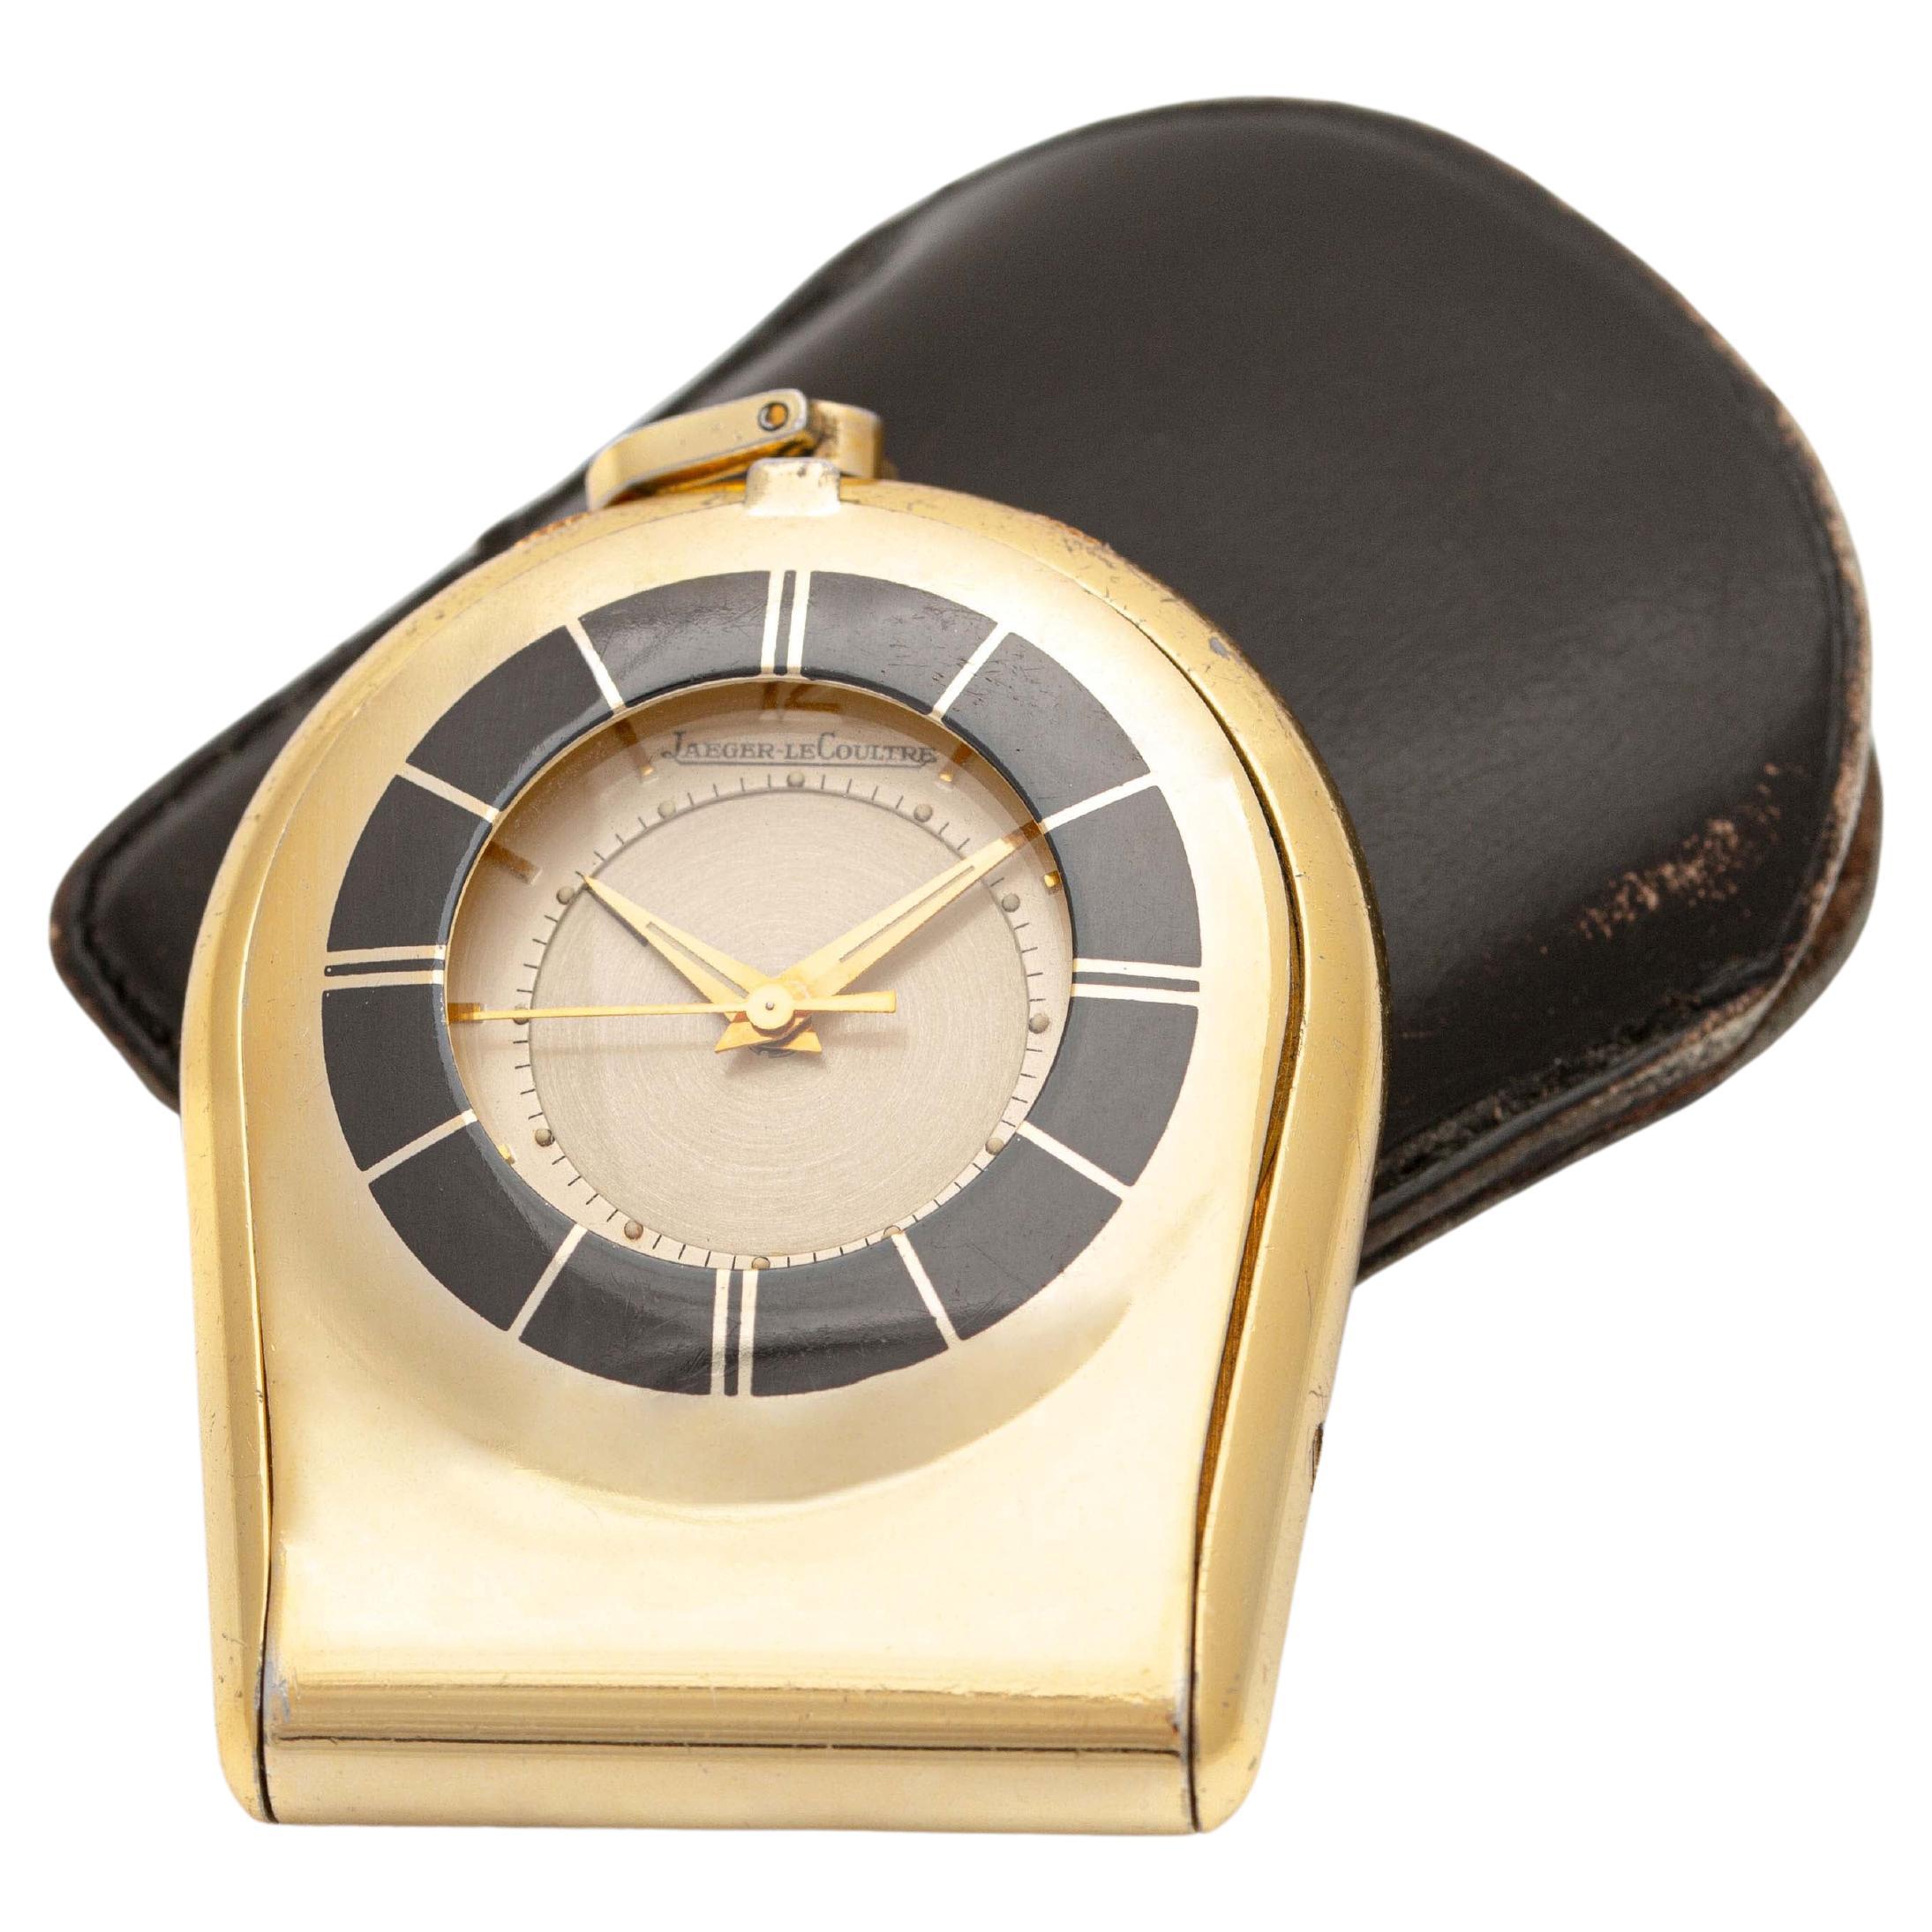 Jaeger-LeCoultre. Gold-Plated Metal Pocket Watch For Sale